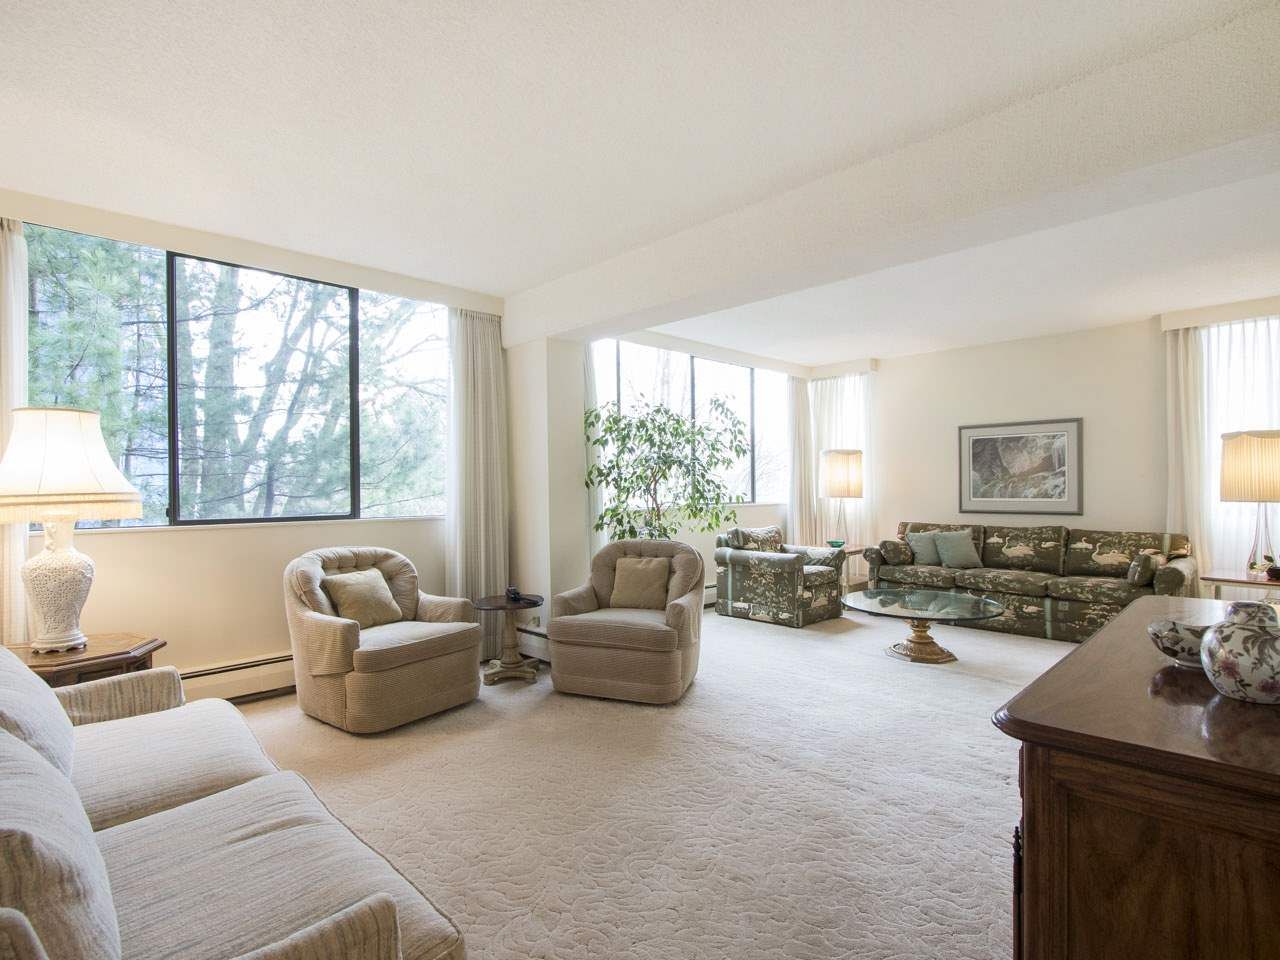 Main Photo: 301 1616 W 13TH AVENUE in Vancouver: Fairview VW Condo for sale (Vancouver West)  : MLS®# R2135445